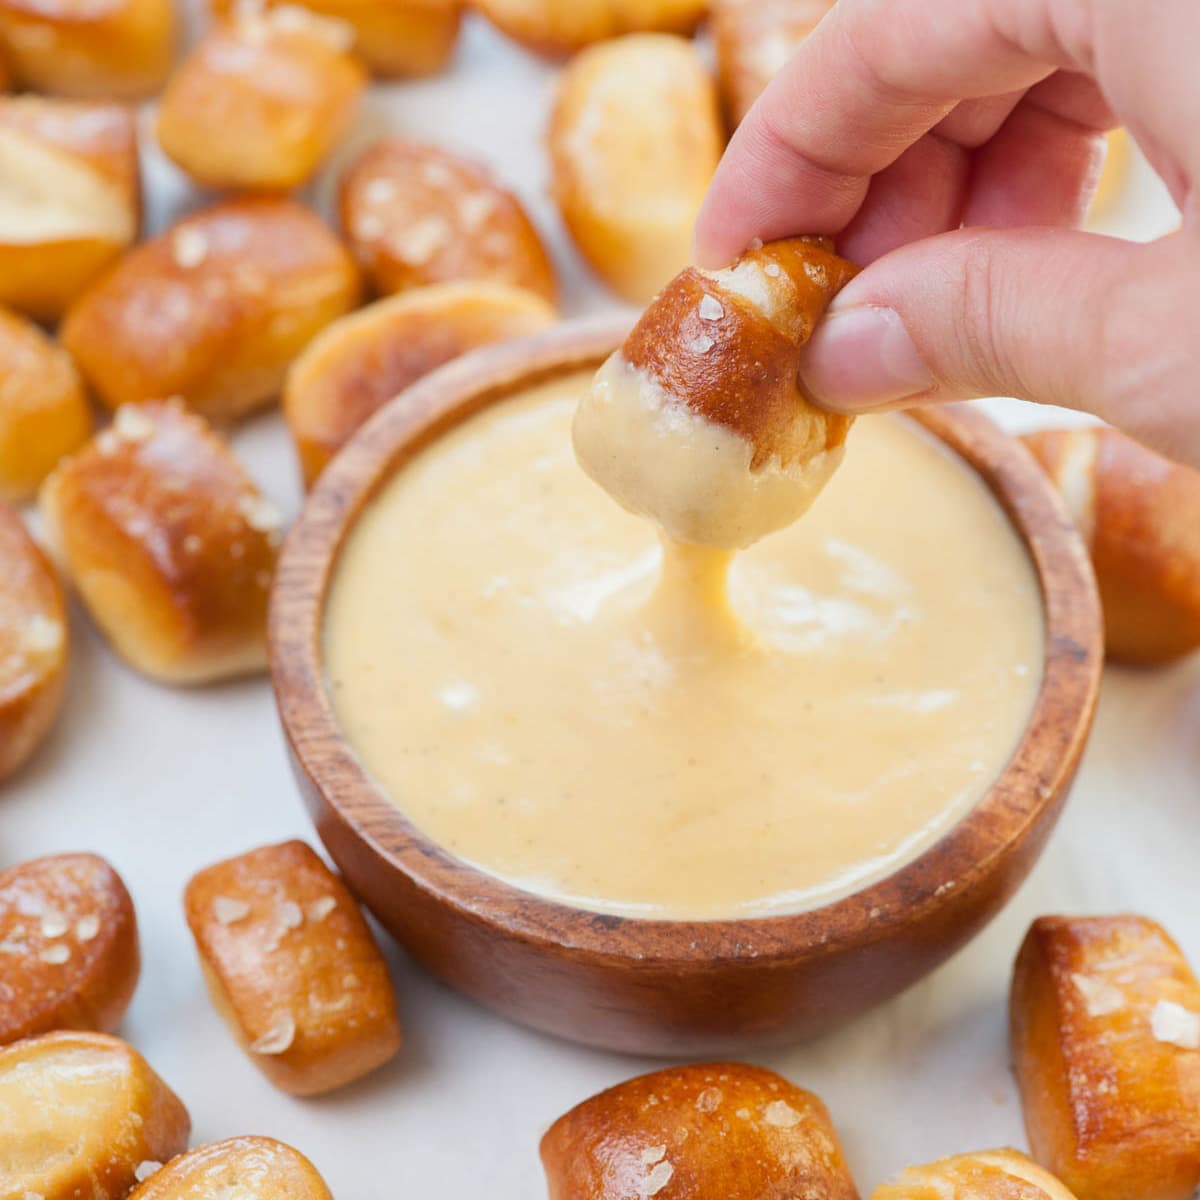 Pretzel bites are being dipped in cheese sauce.